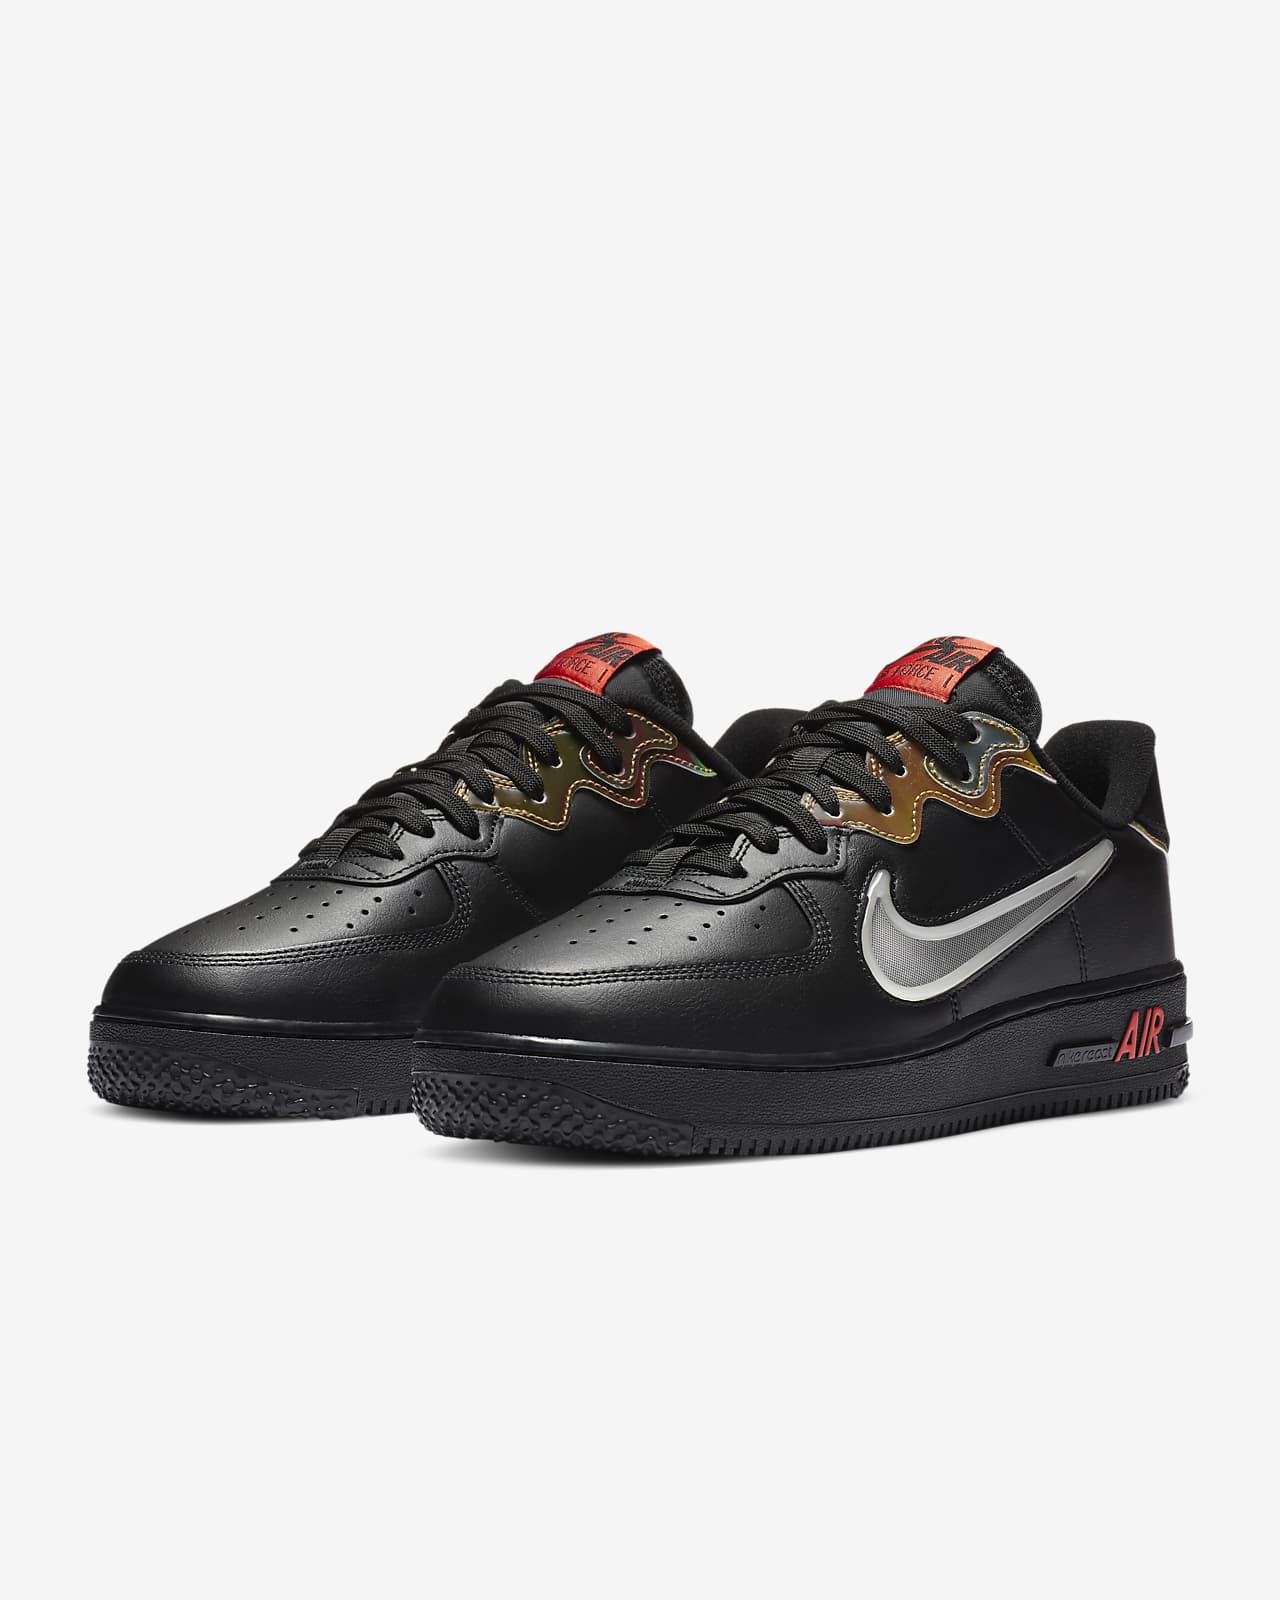 air force one shoes black